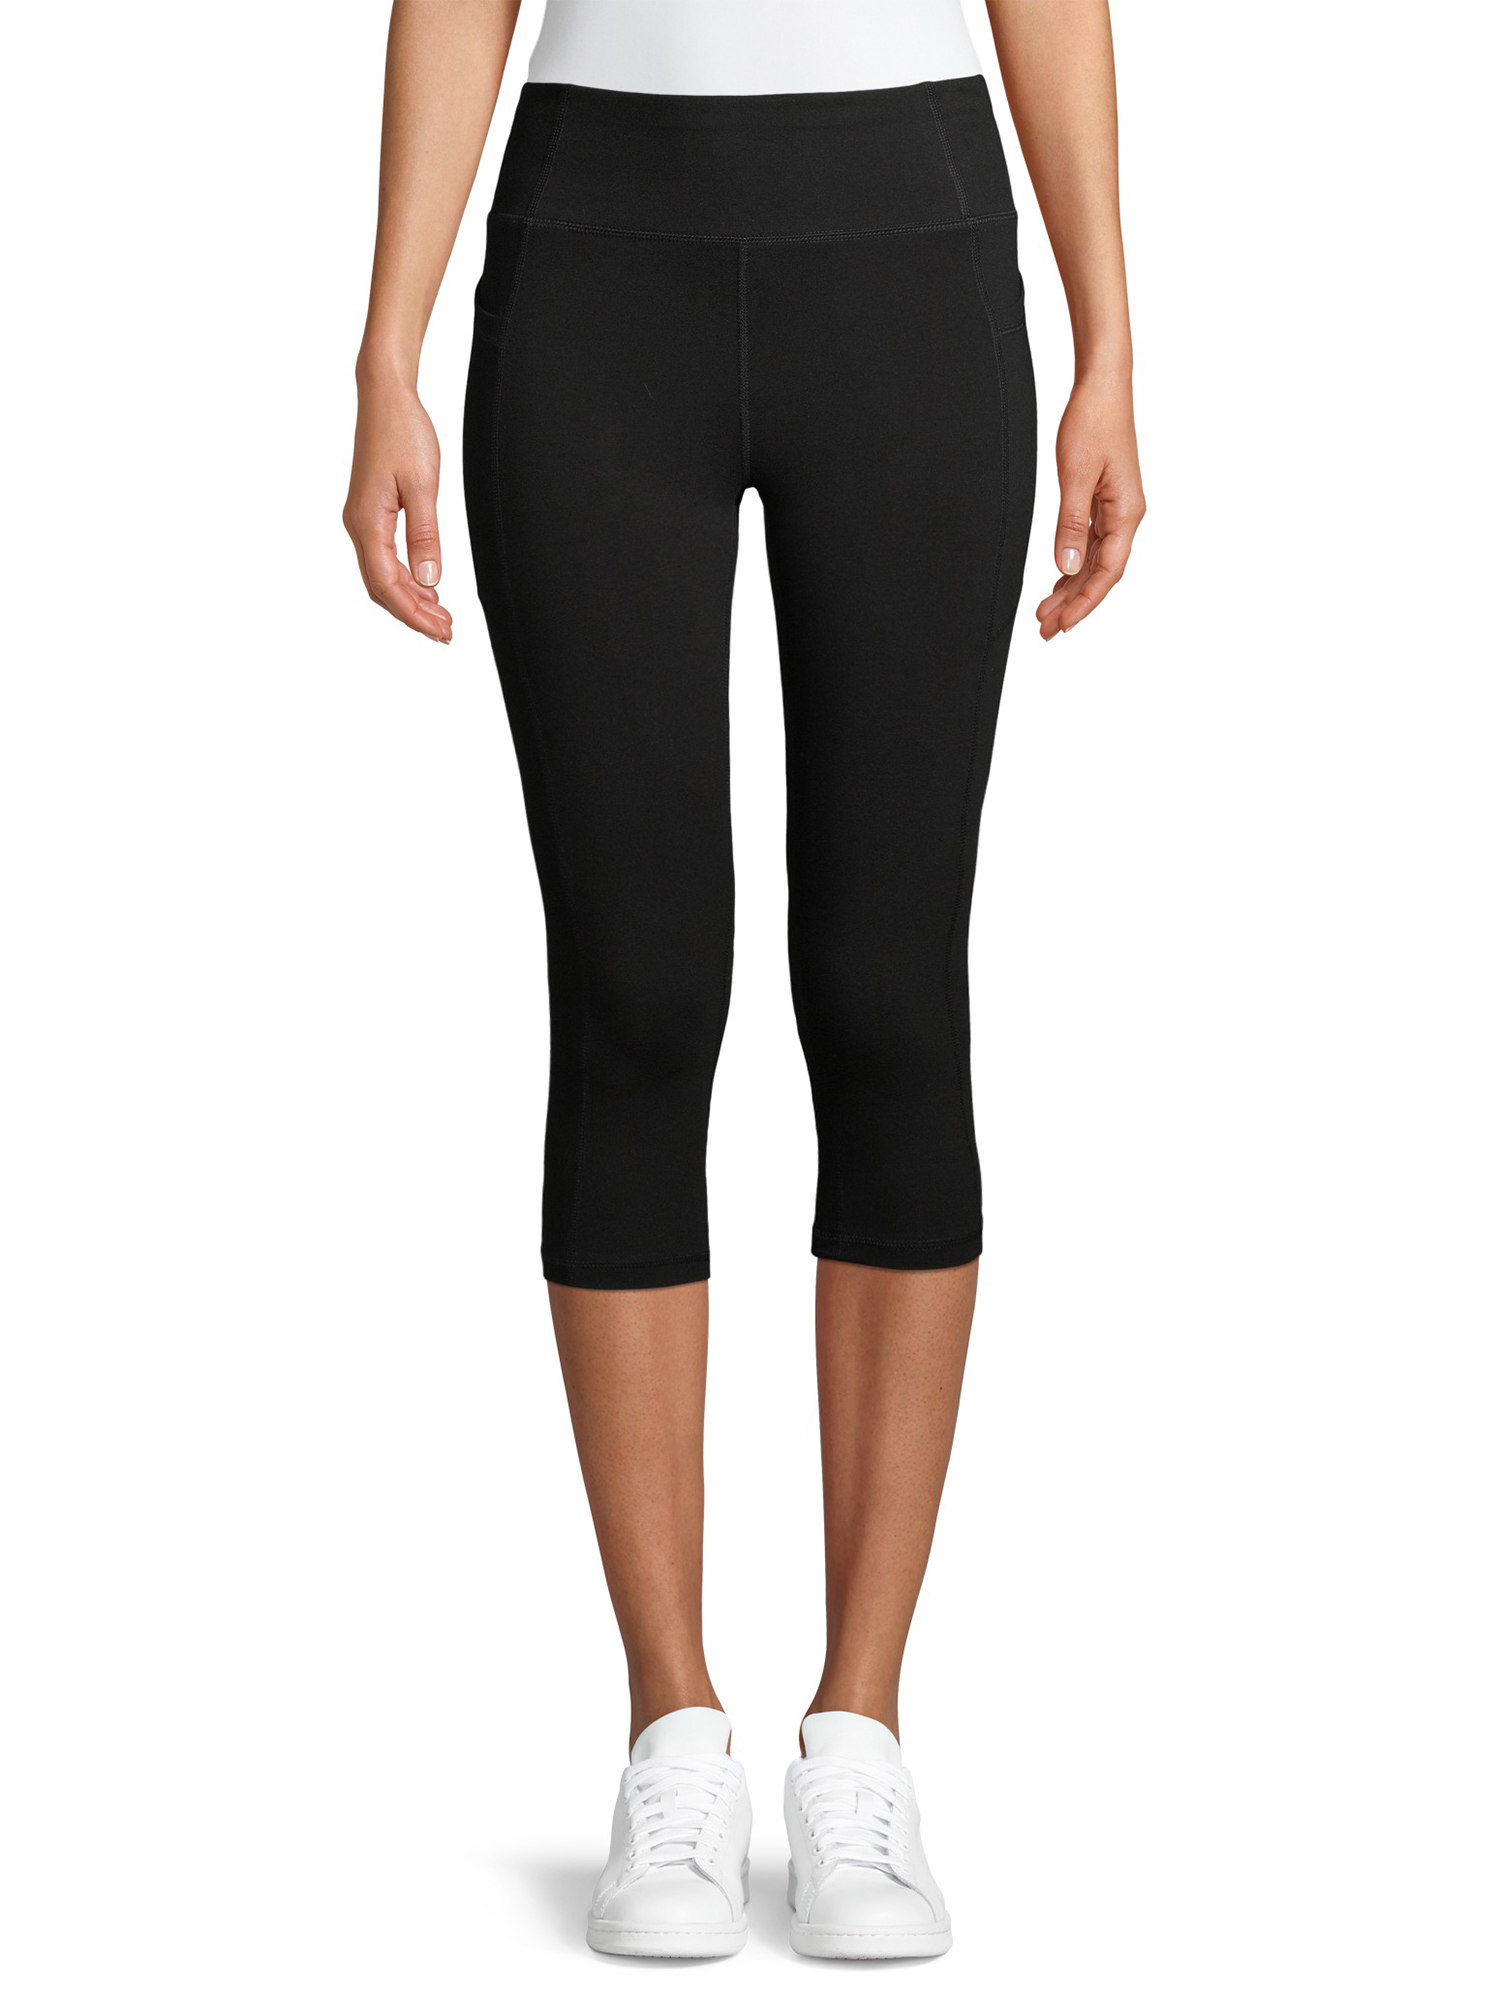 Athletic Works Women's Capris with Side Pockets - image 1 of 6